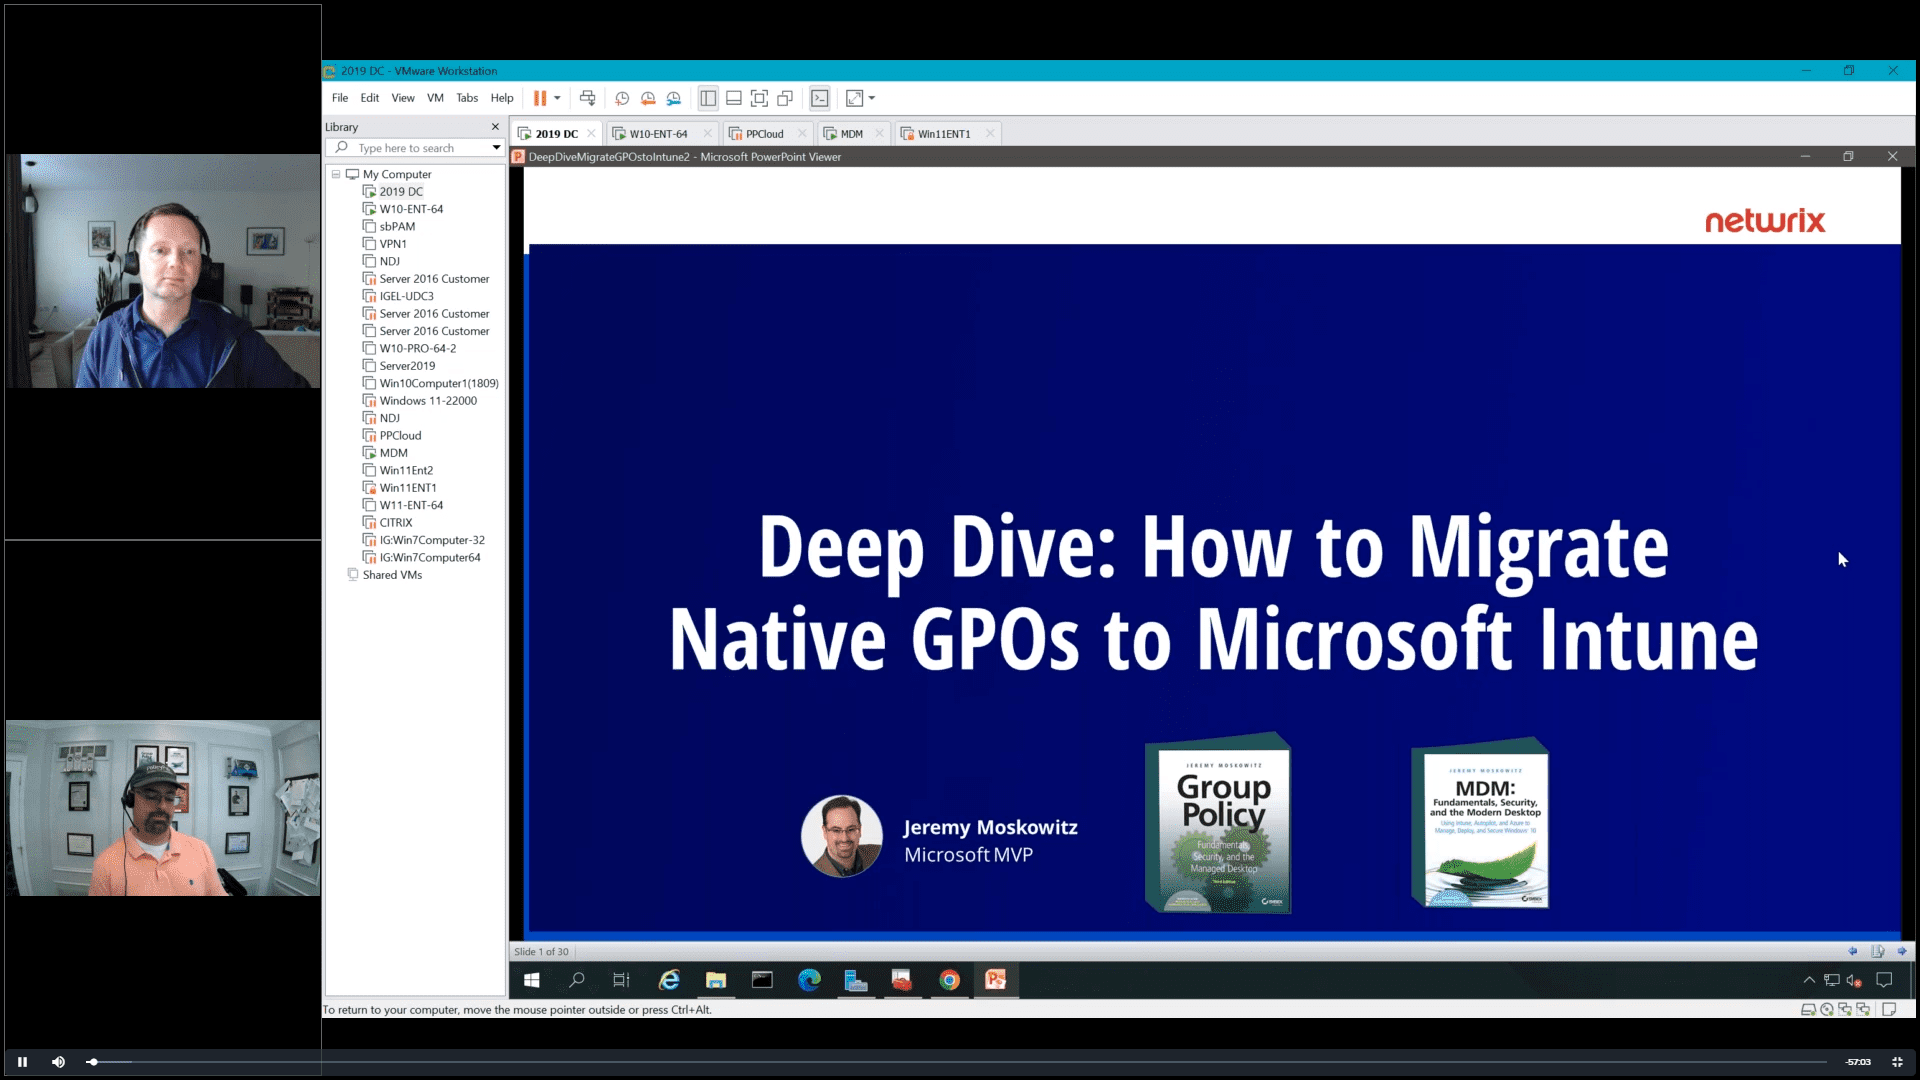 How to Migrate Native GPOs